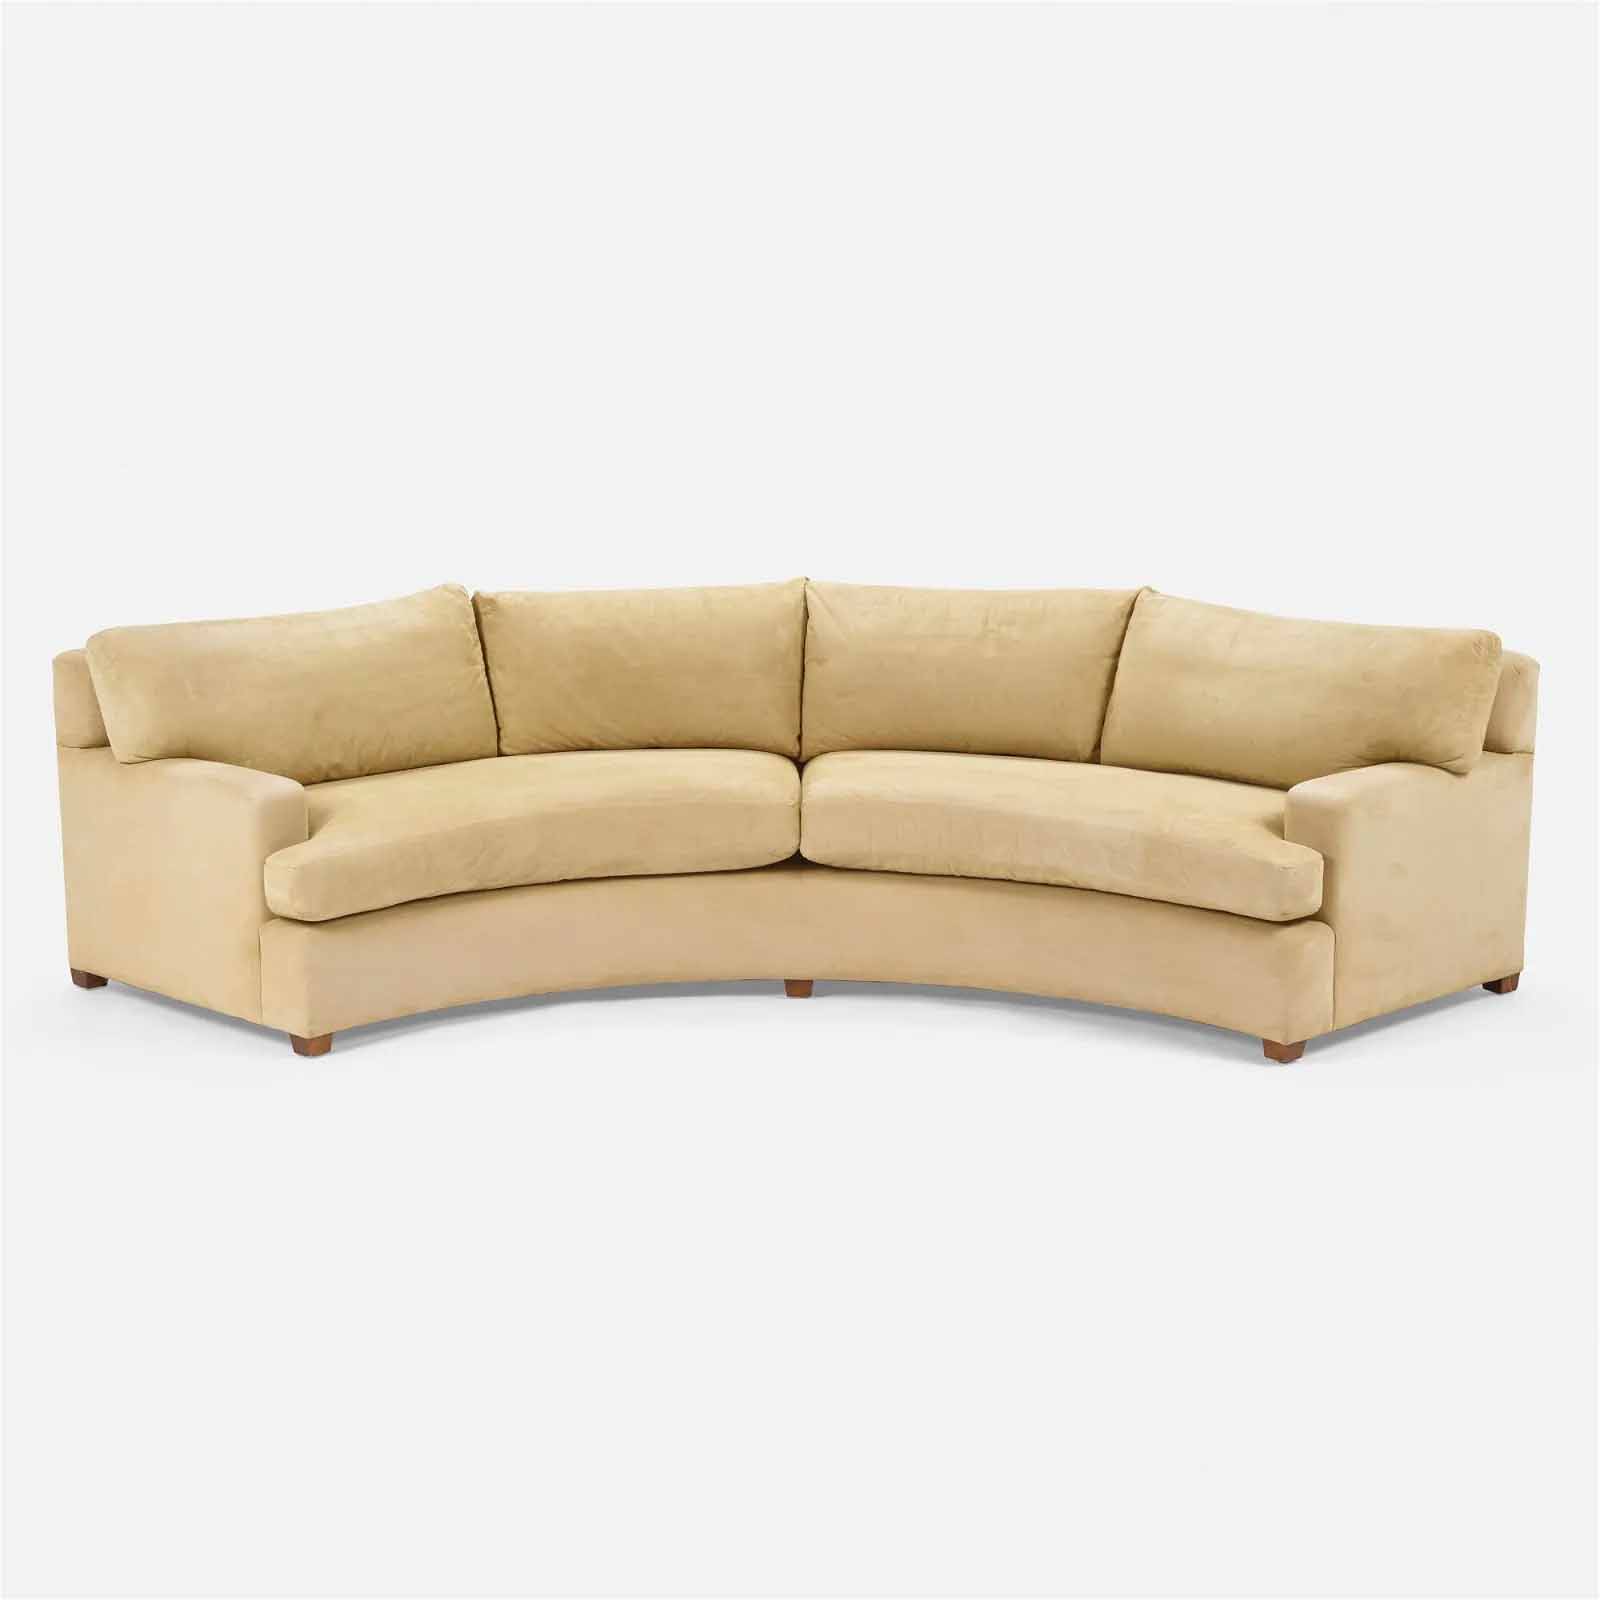 William 'Billy' Haines curved sofa, which sold for $30,000 ($39,300 with buyer's premium) at LAMA.